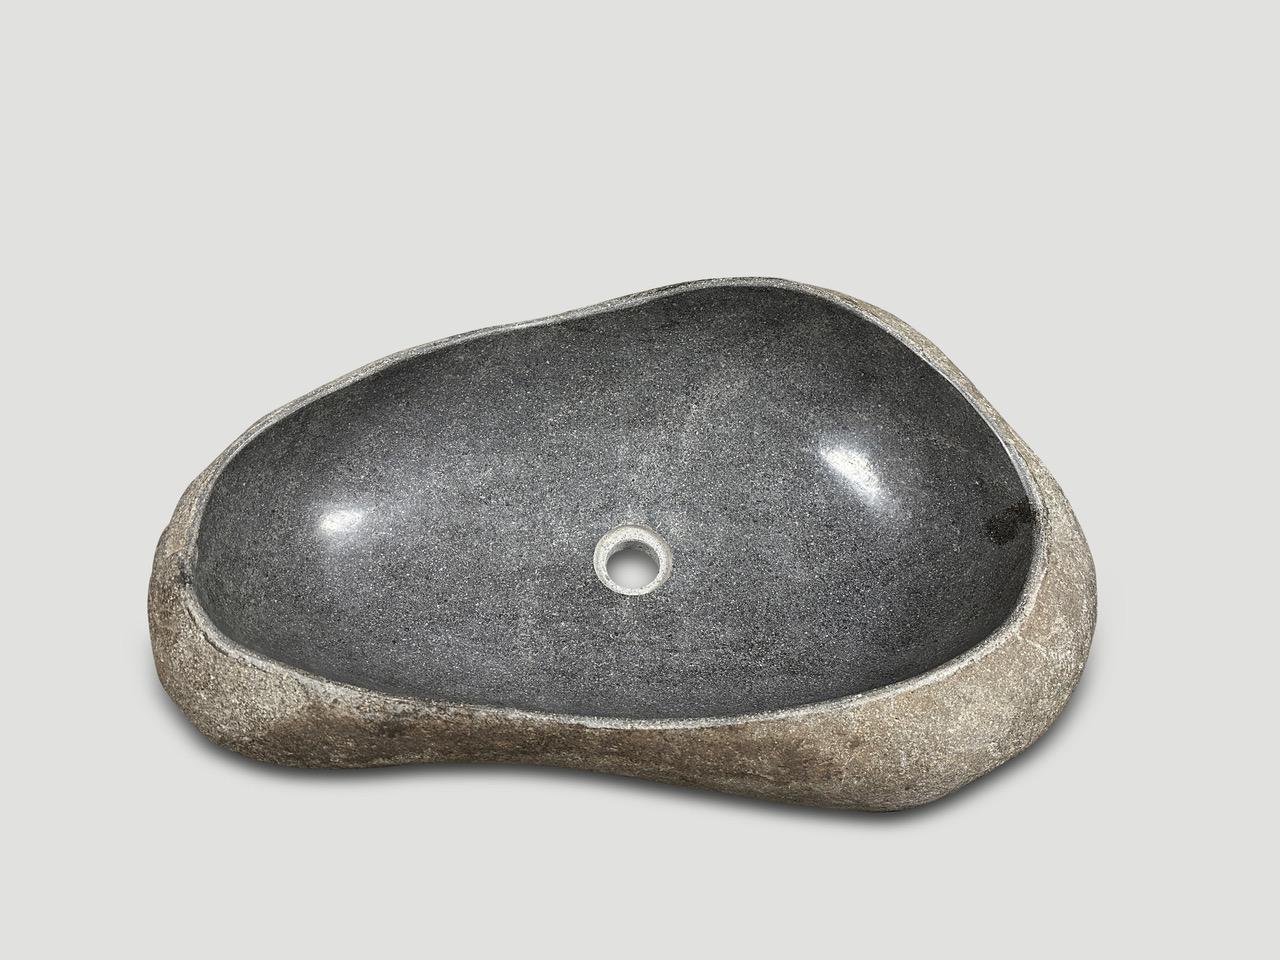 One of a kind minimalist vessels made from river rock sourced from the Ayung river in Bali. The inside is polished and the outside is sanded and left unpolished in contrast. We have a collection. Please inquire for sizes.

These vessels are sourced